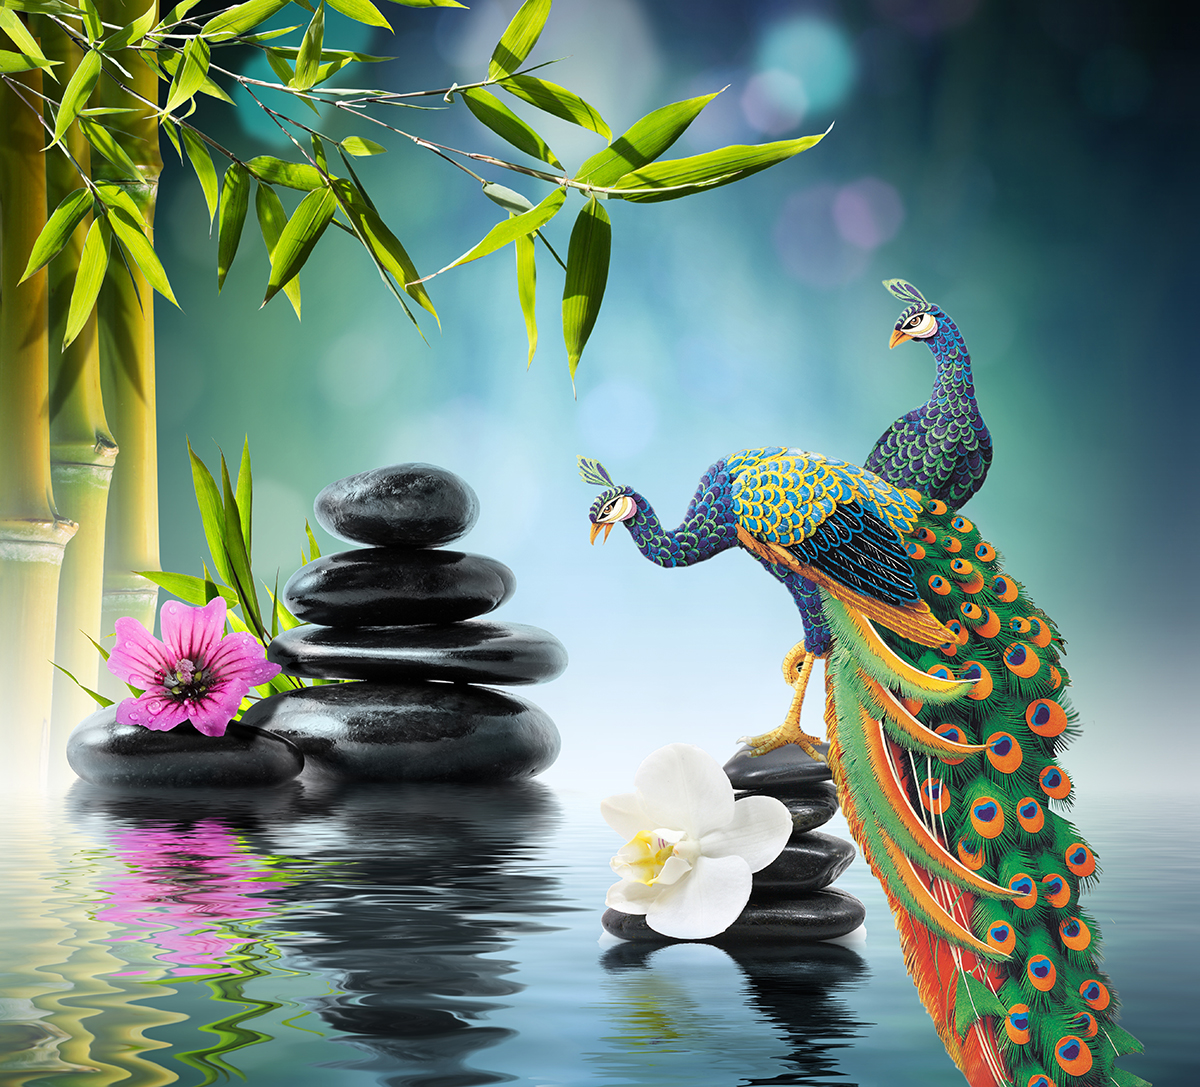 A peacock on a rock